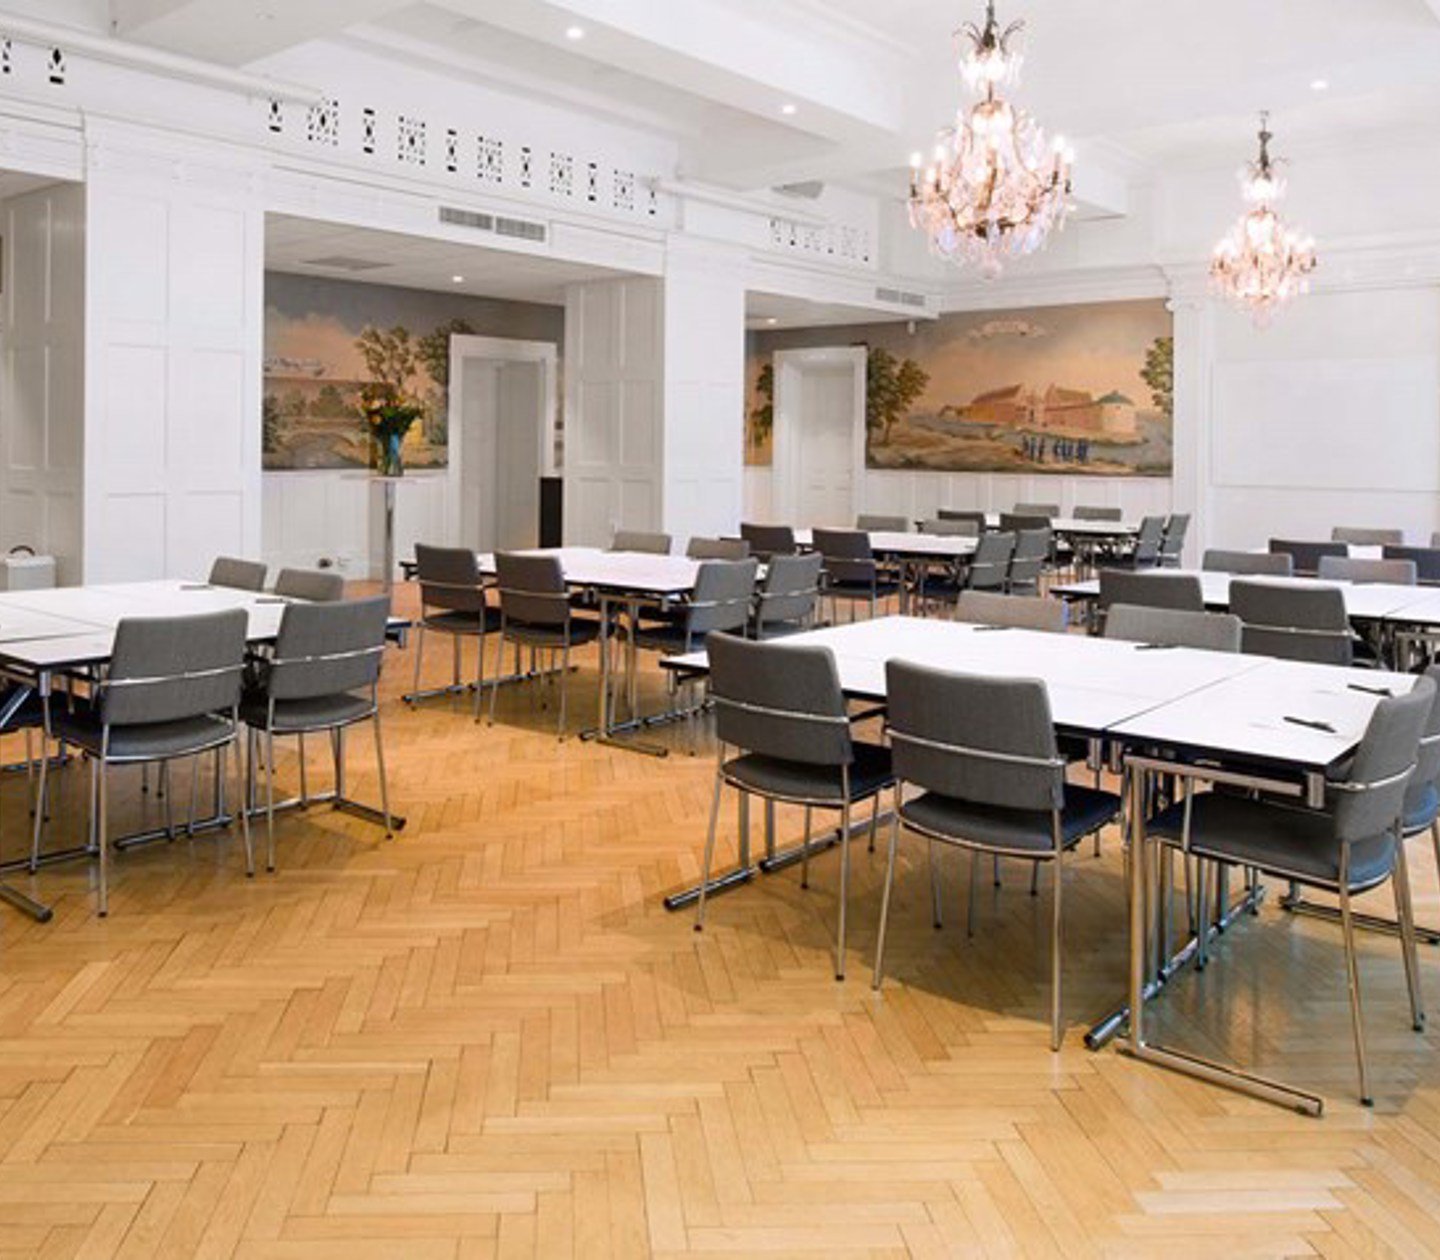 Conference room with crystal chandeliers on the ceiling prepared for meeting